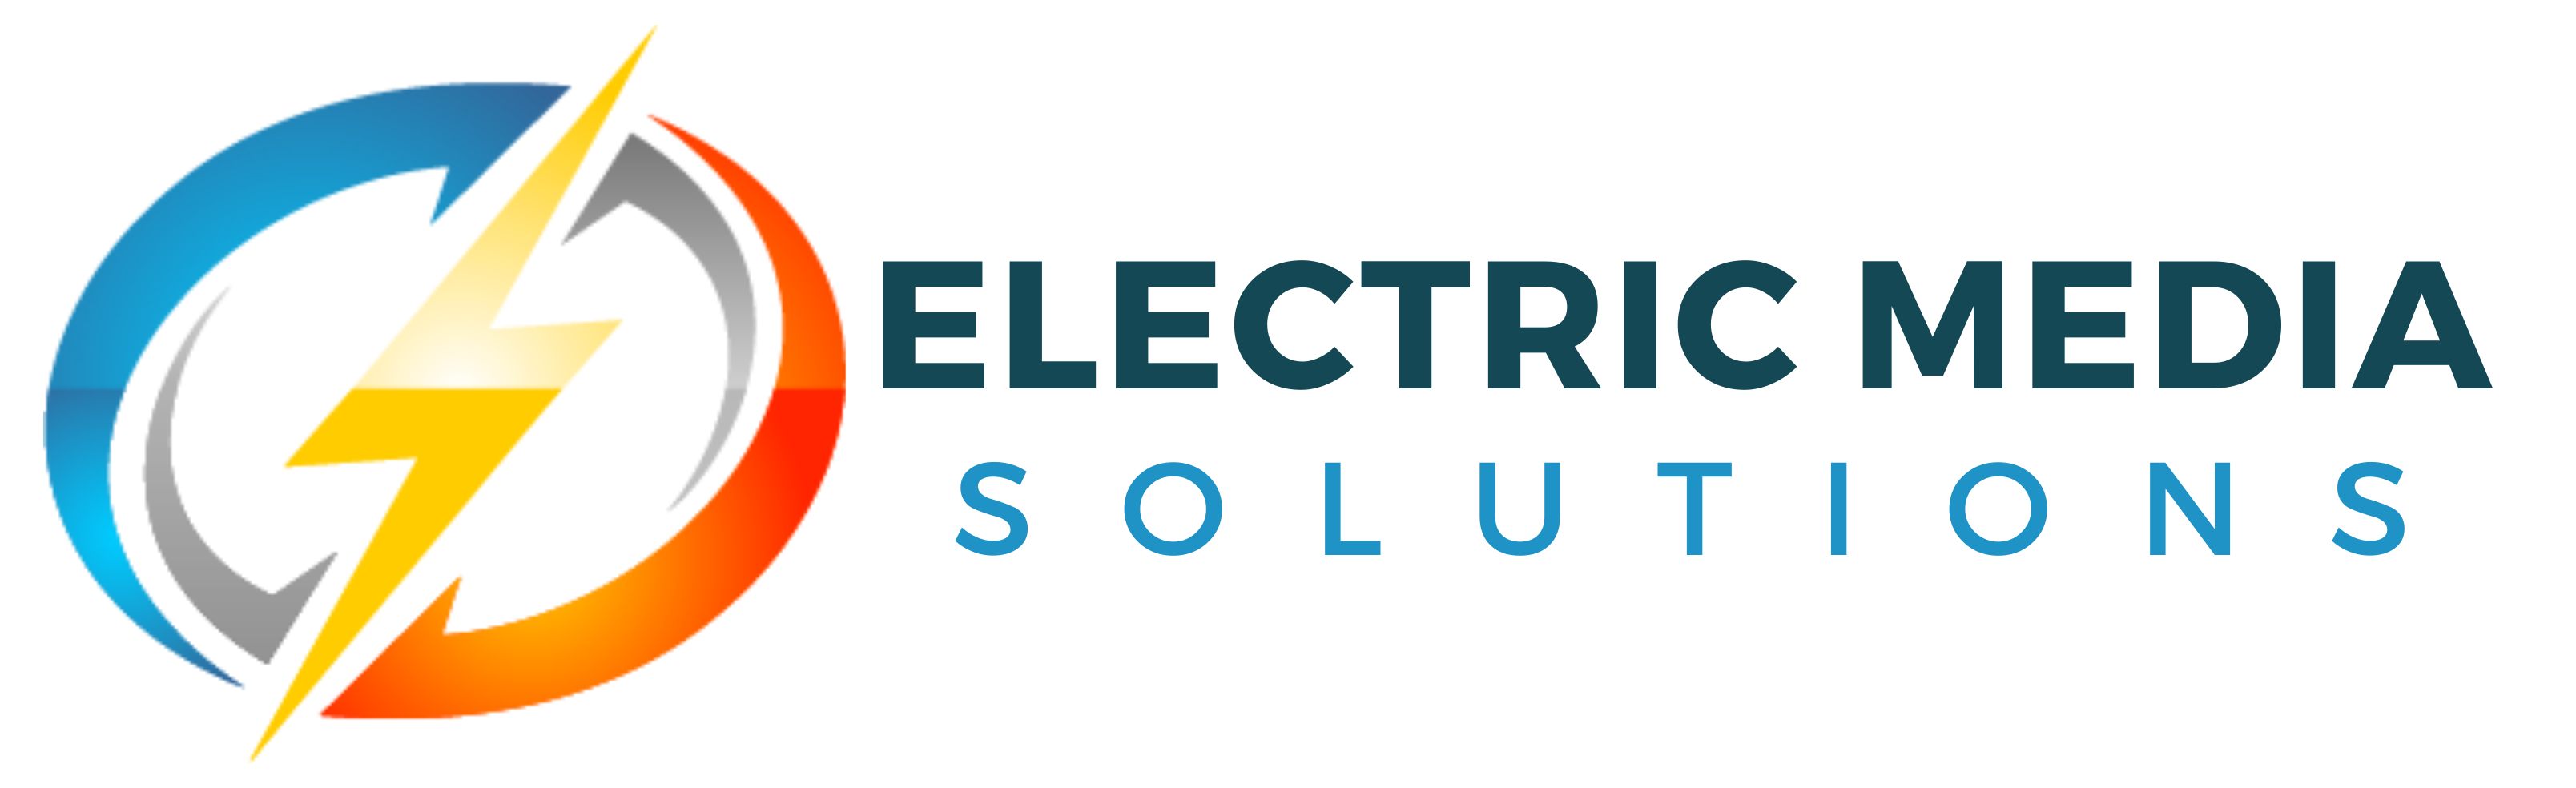 Electric Media Solutions